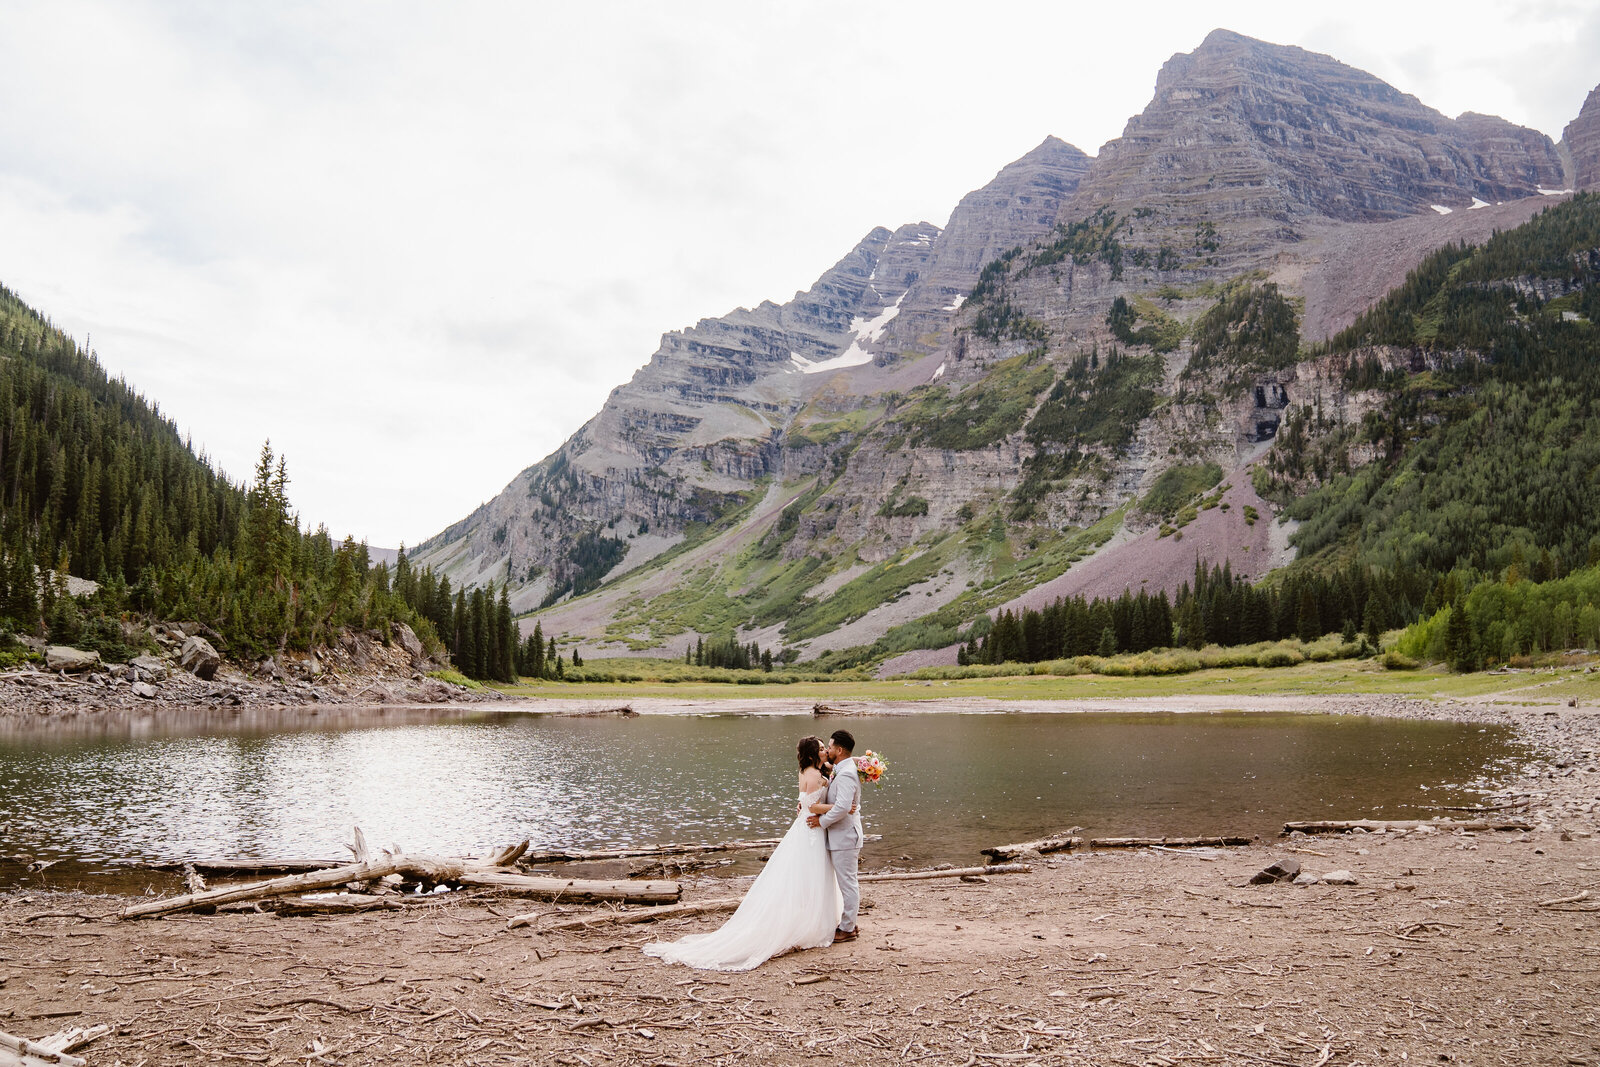 Colorado Elopement Photographer and Videographer at Maroon Bells Amphitheater in Aspen, Colorado